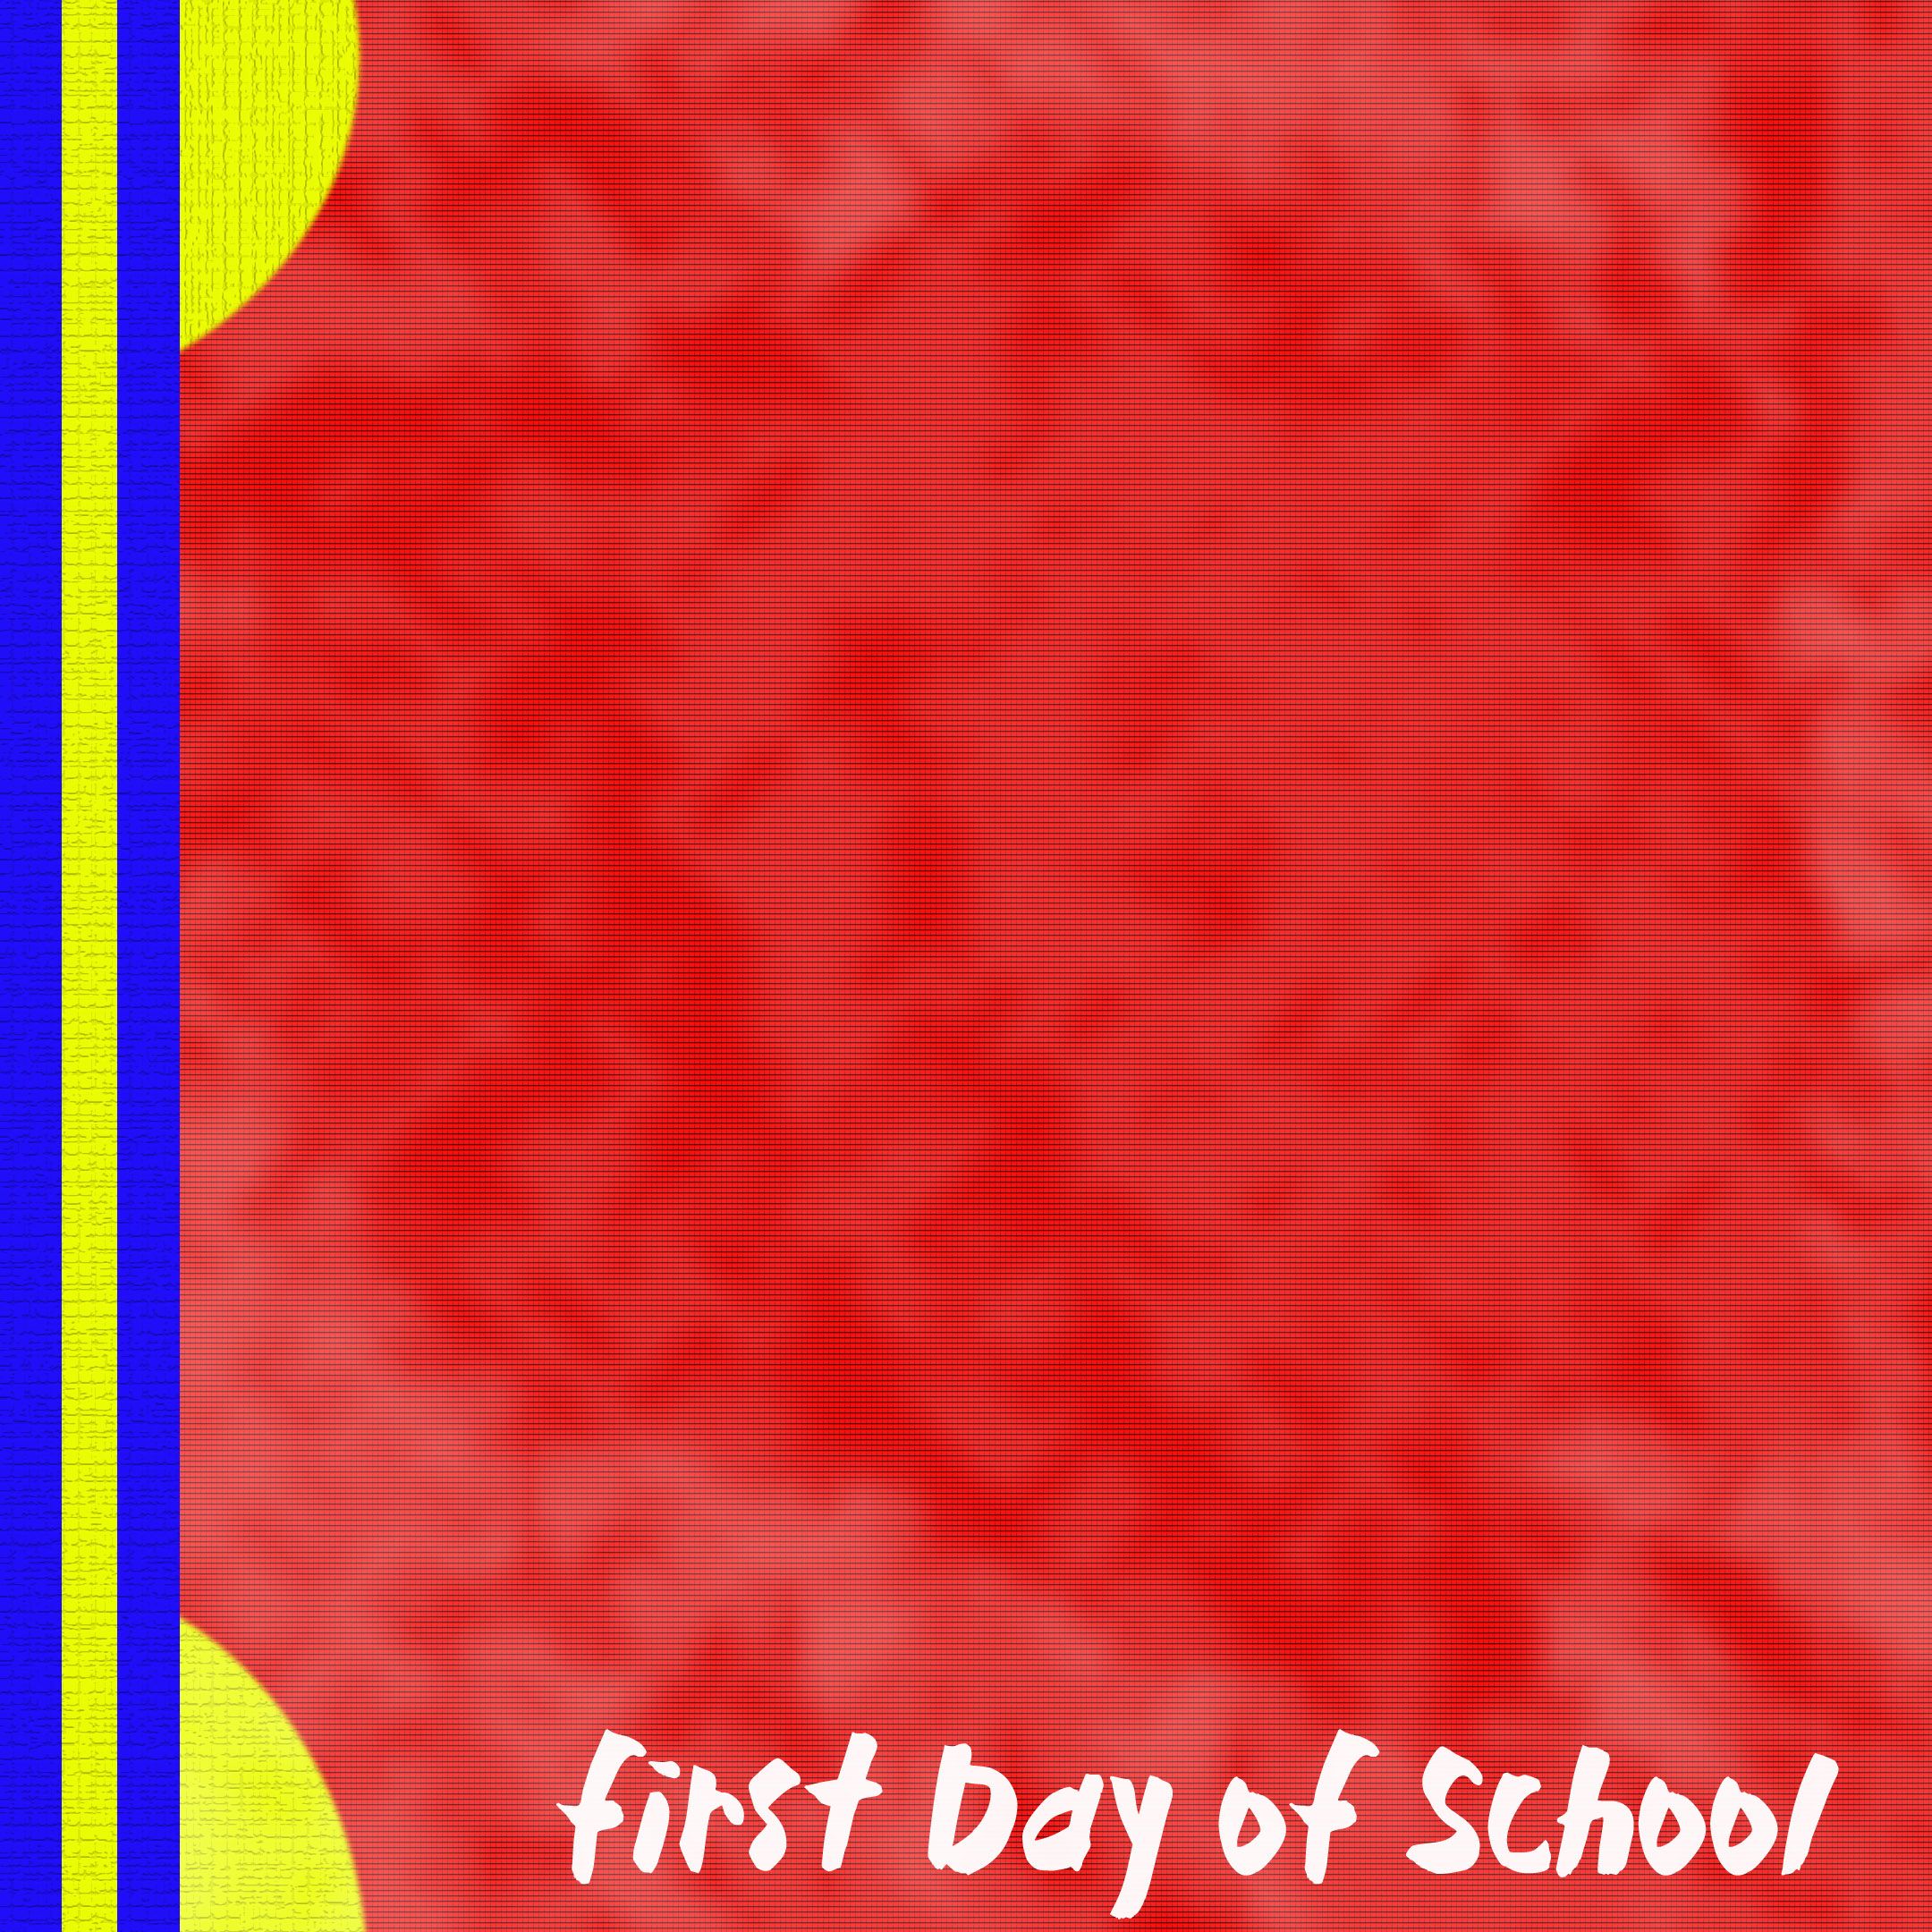 First Day of School Wallpaper. Holiday Wallpaper, Day of the Dead Wallpaper and Day of the Dead Skull Wallpaper